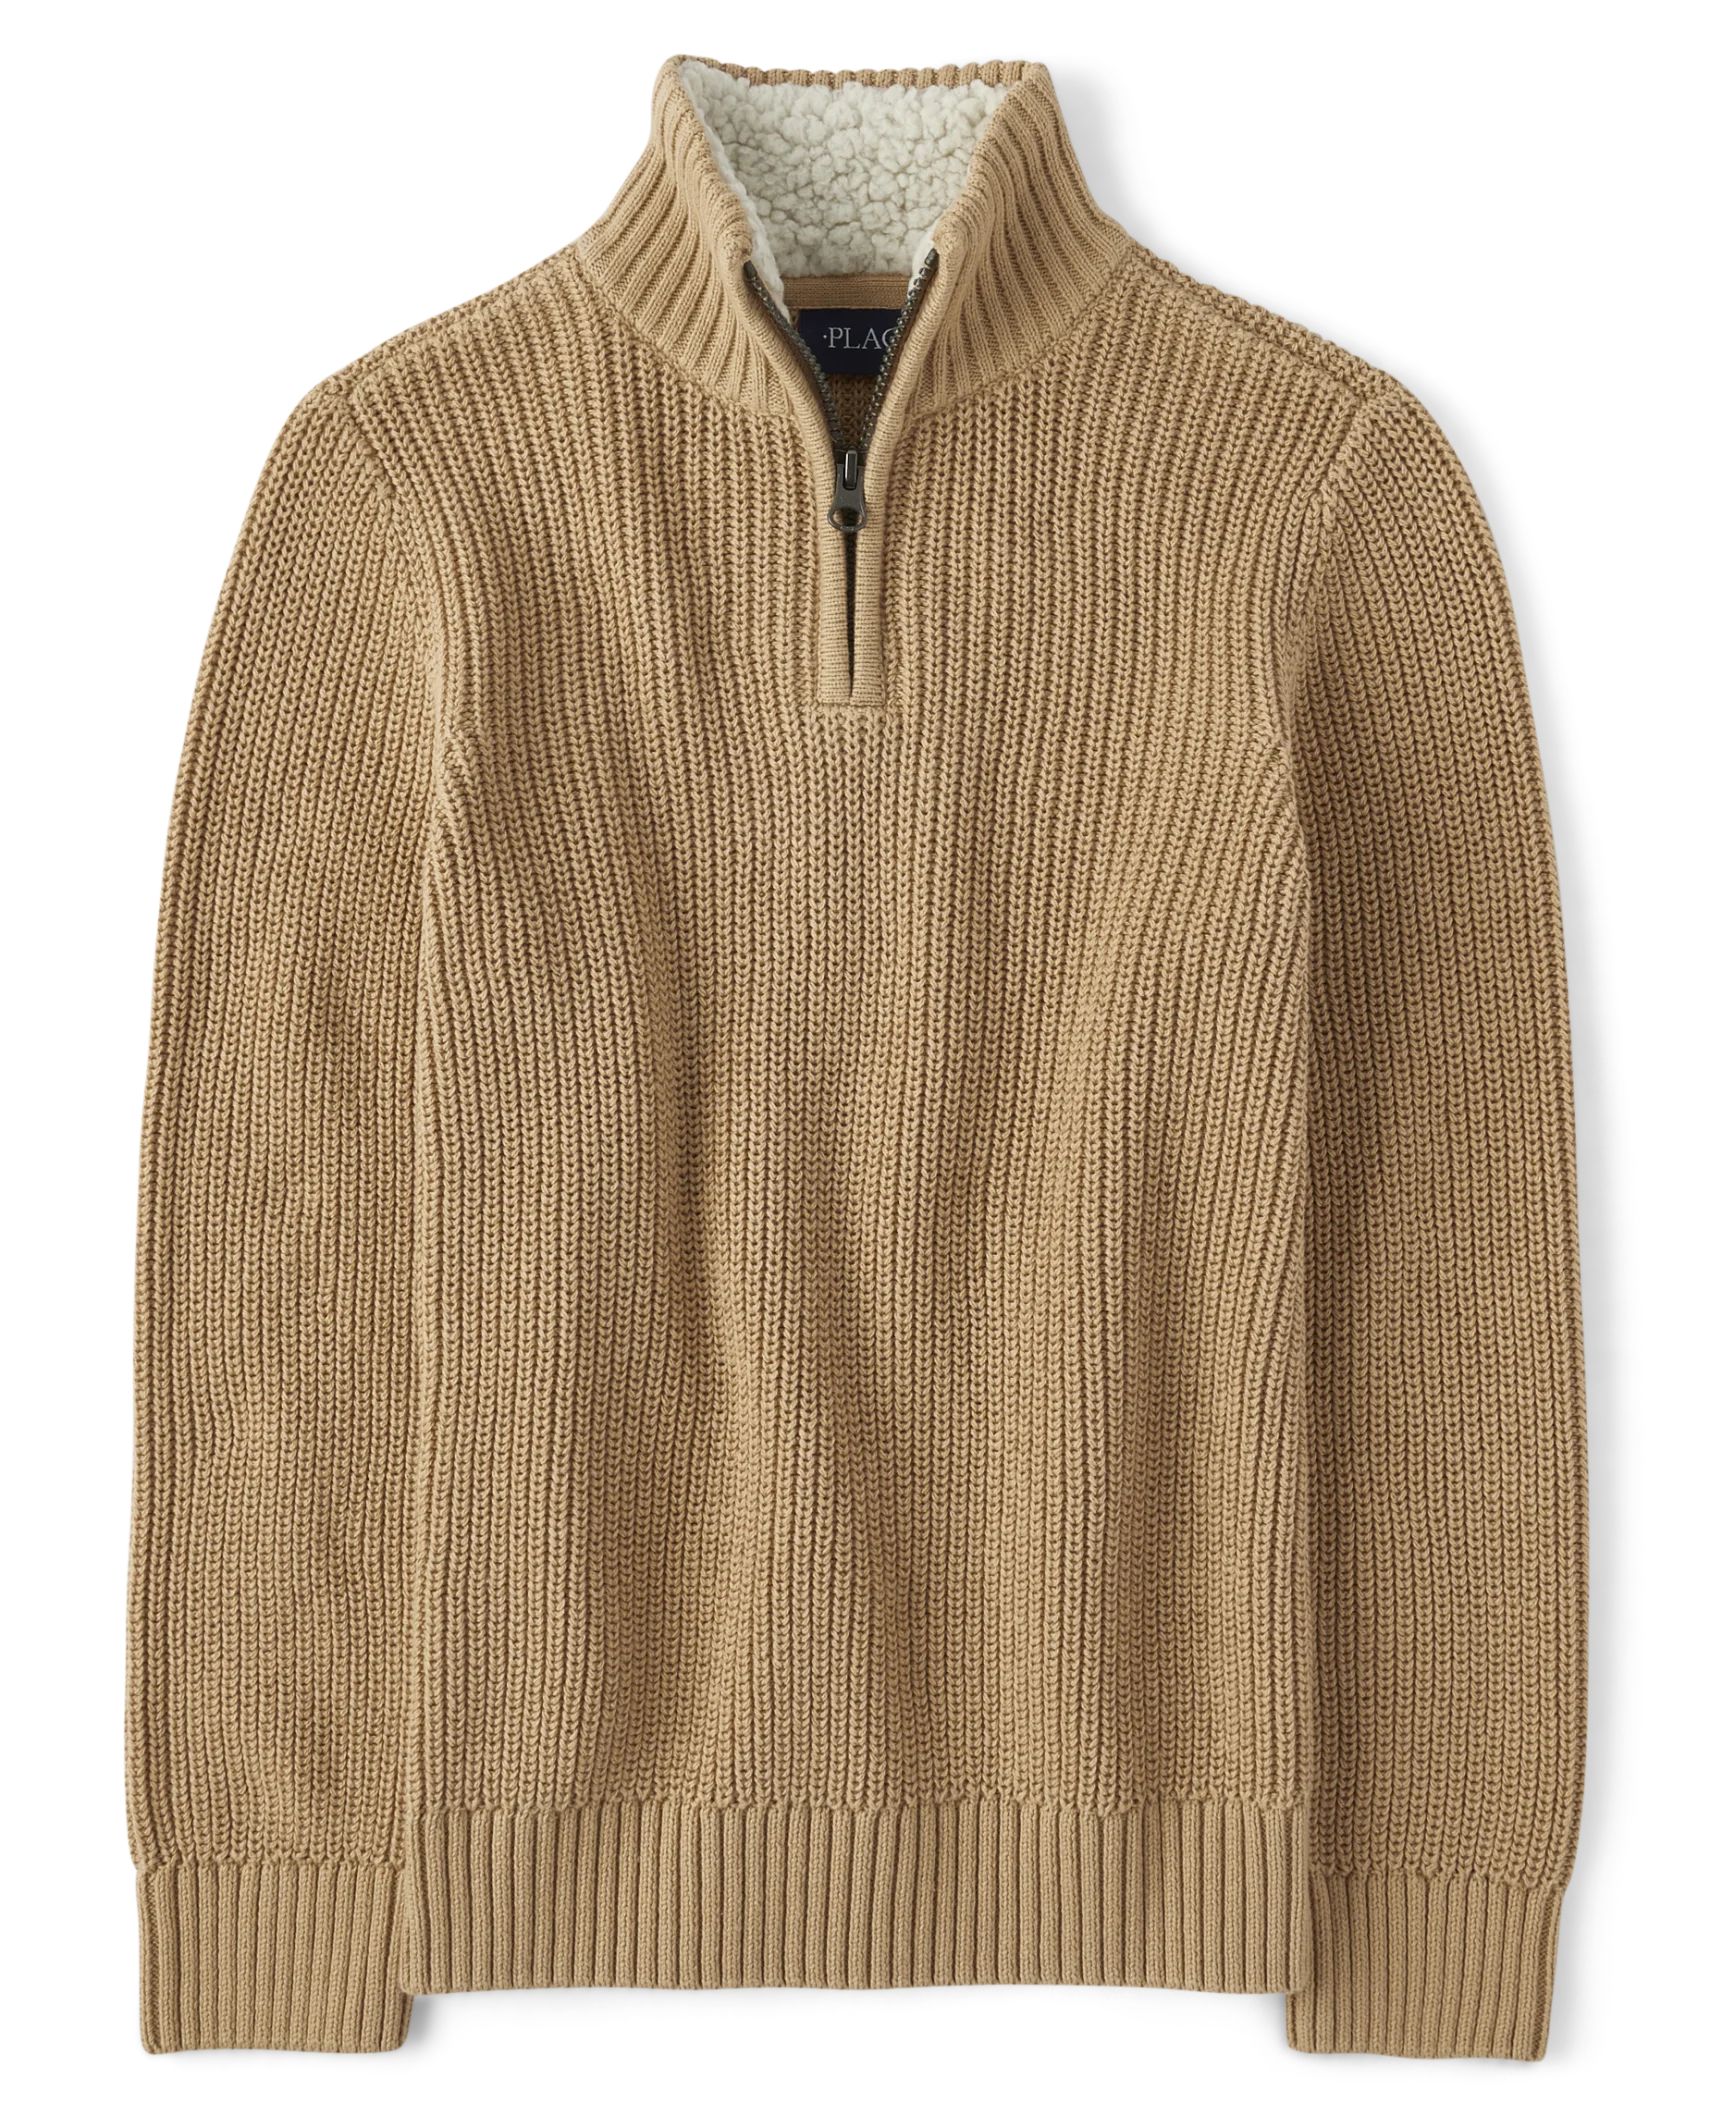 Boys Dad And Me Quarter-Zip Sweater - cork | The Children's Place